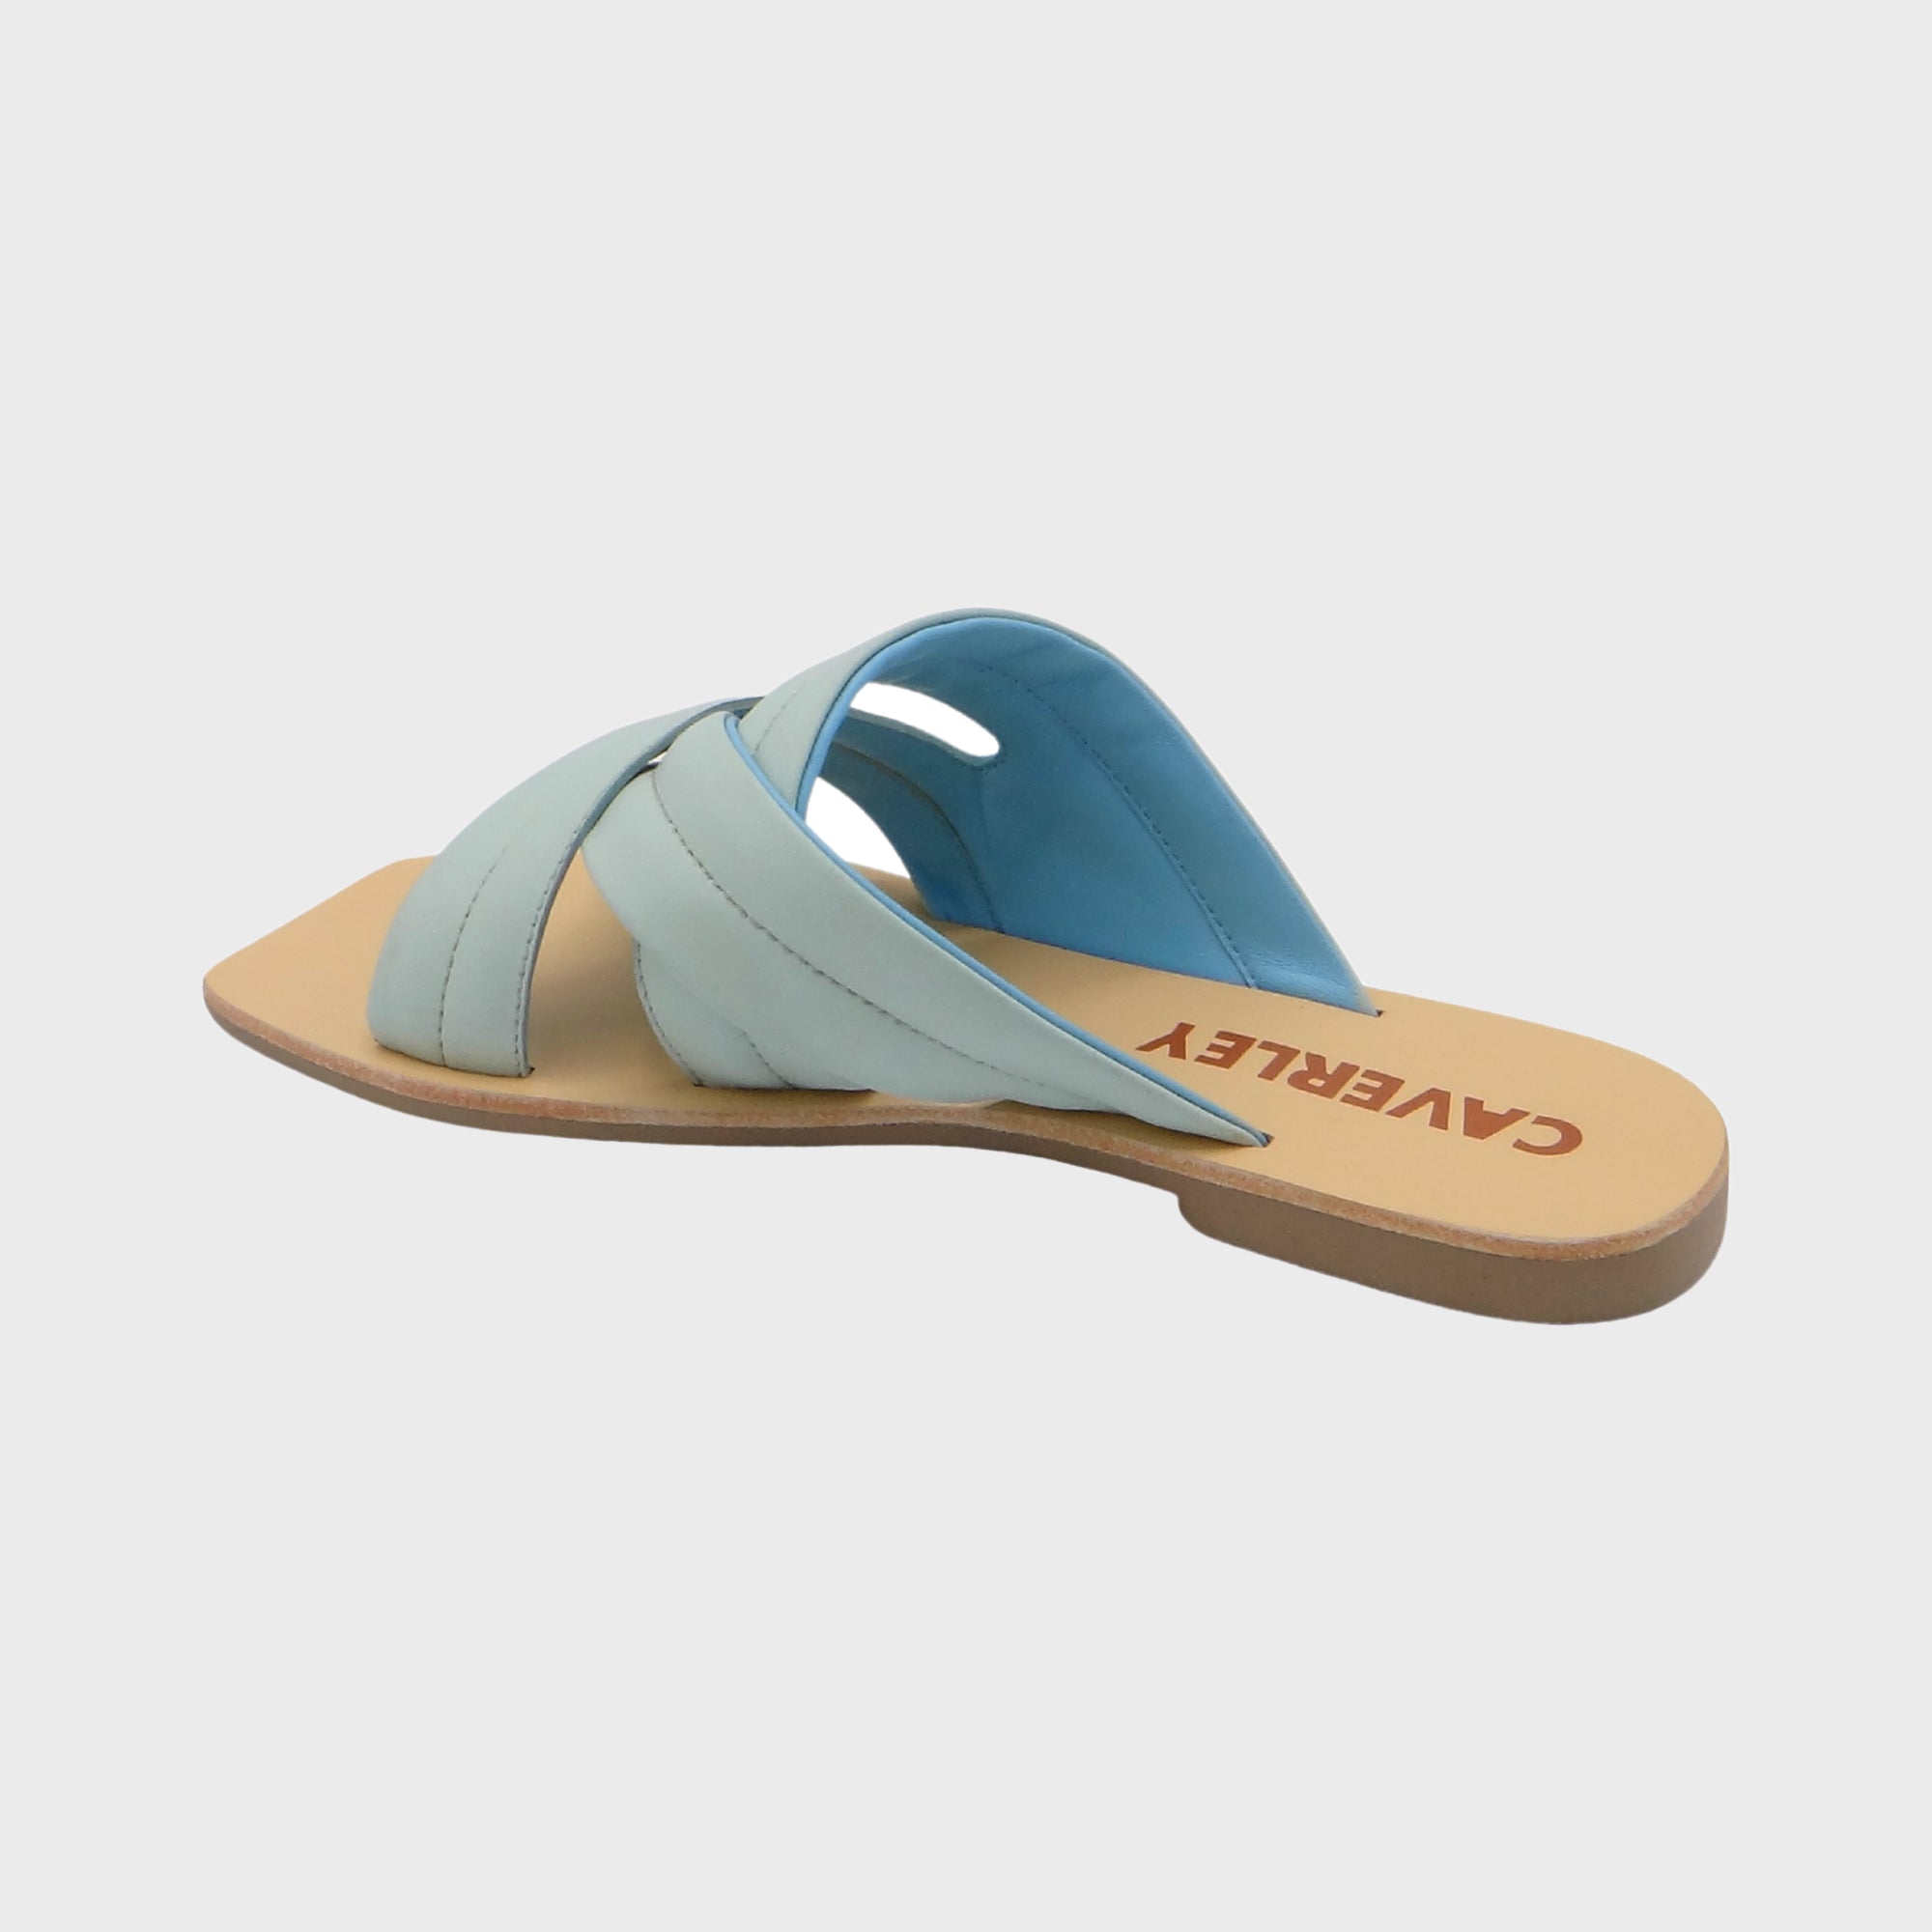 CAVERLEY Bennie Slide in Light Blue 23S516C Periwinkle Blue FROM EIGHTYWINGOLD - OFFICIAL BRAND PARTNER